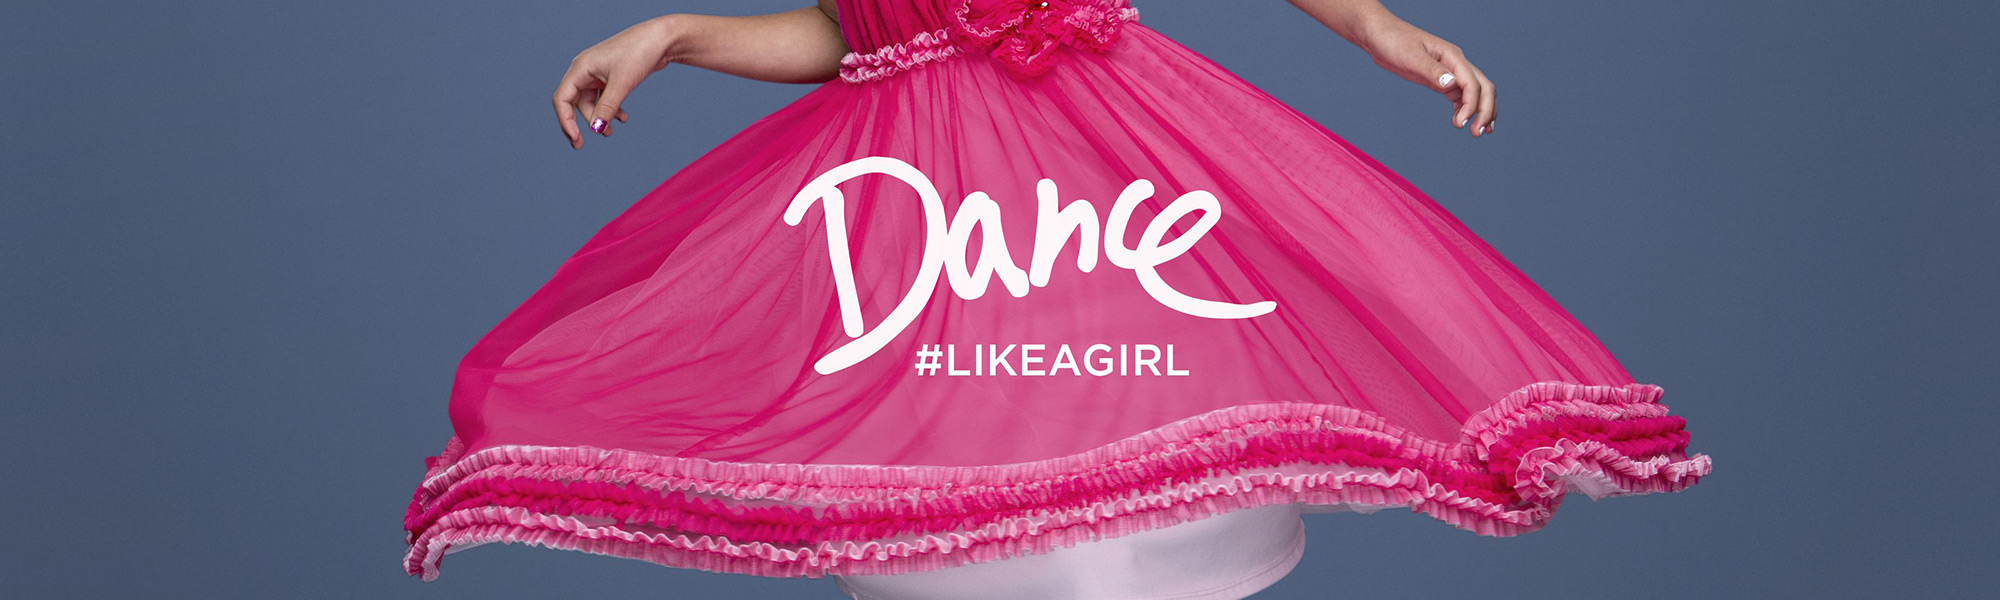 #LikeAGirl: 5 Great Pieces of Branded Content That Get Behind Female Empowerment